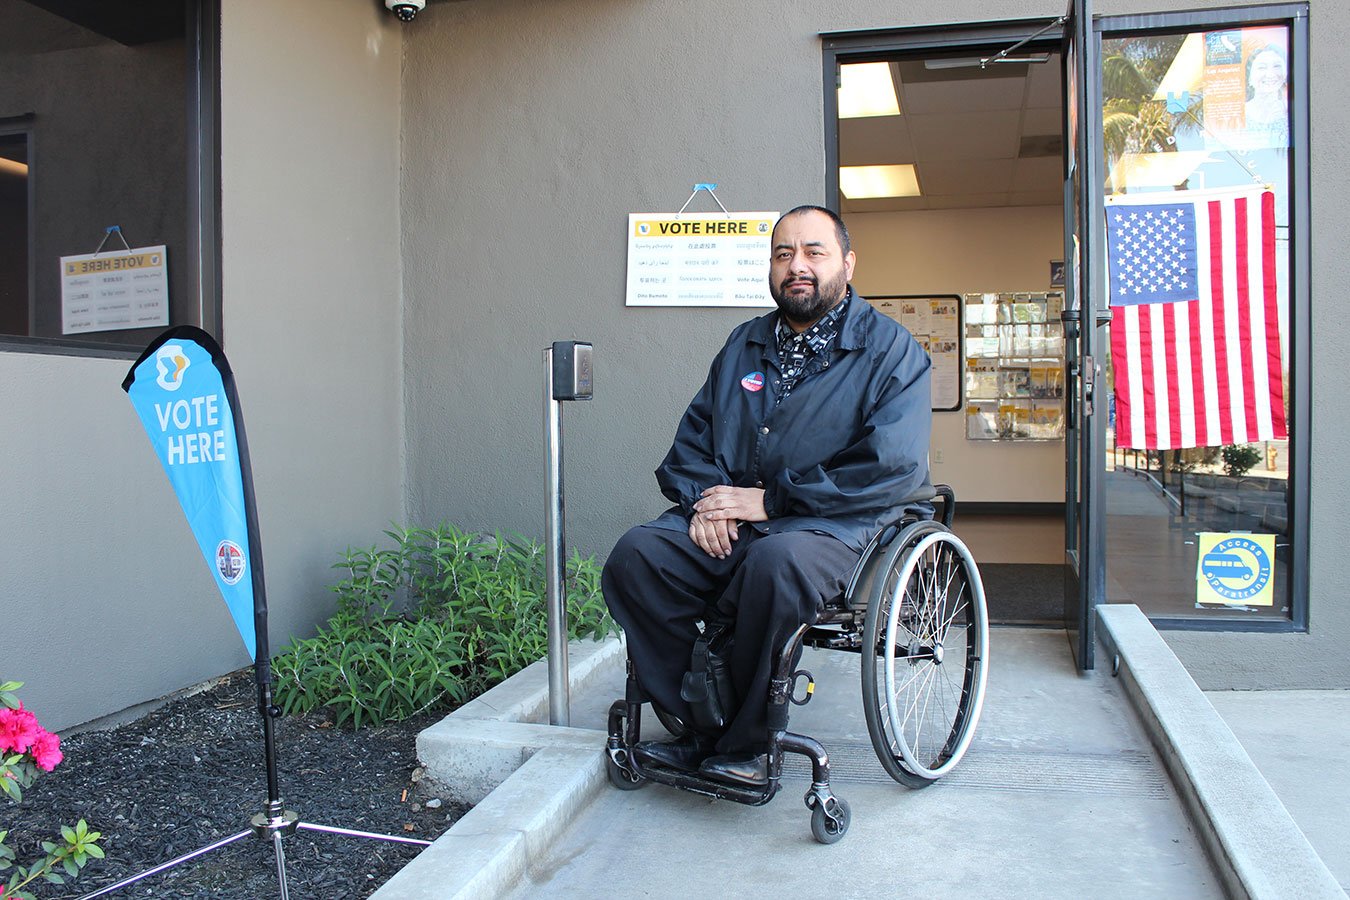 Richard Hernandez used the new voting machines at the Disabled Resources Center in Long Beach, where he works as an advocate. He said the machines were user-friendly and accommodated his wheelchair.